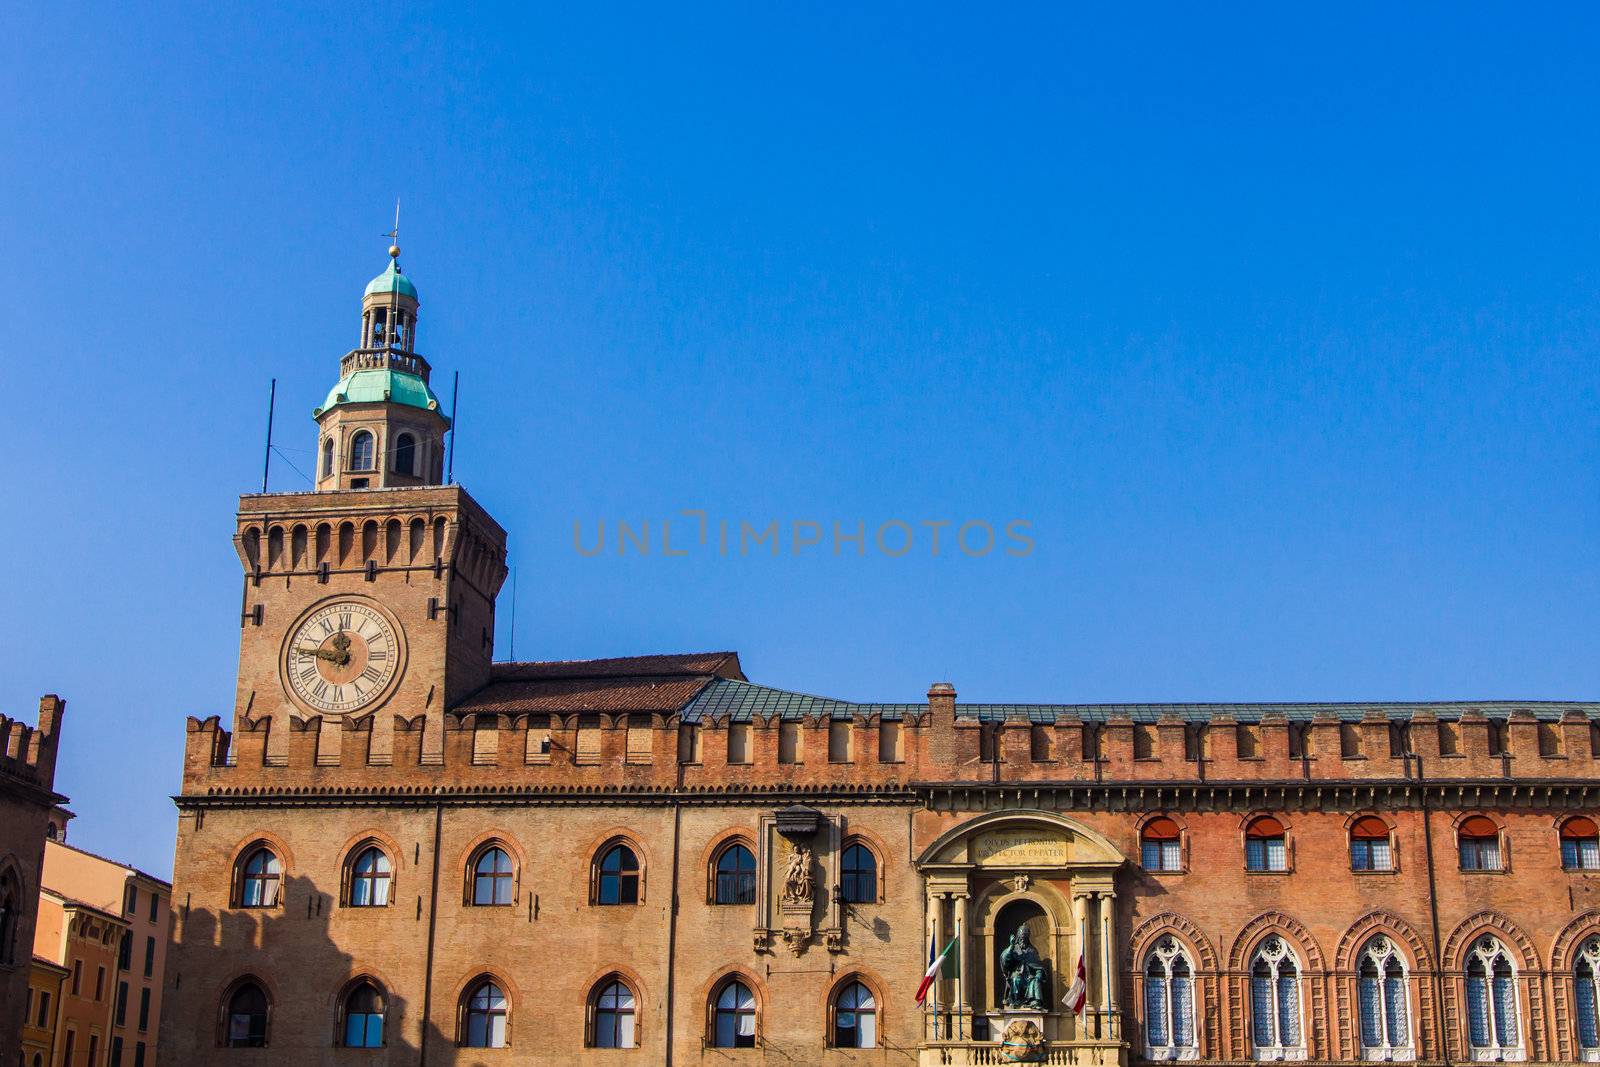 Palazzo d'Accursio is home to the Civic Art Collection, with paintings from the Middle Ages to the 19th century